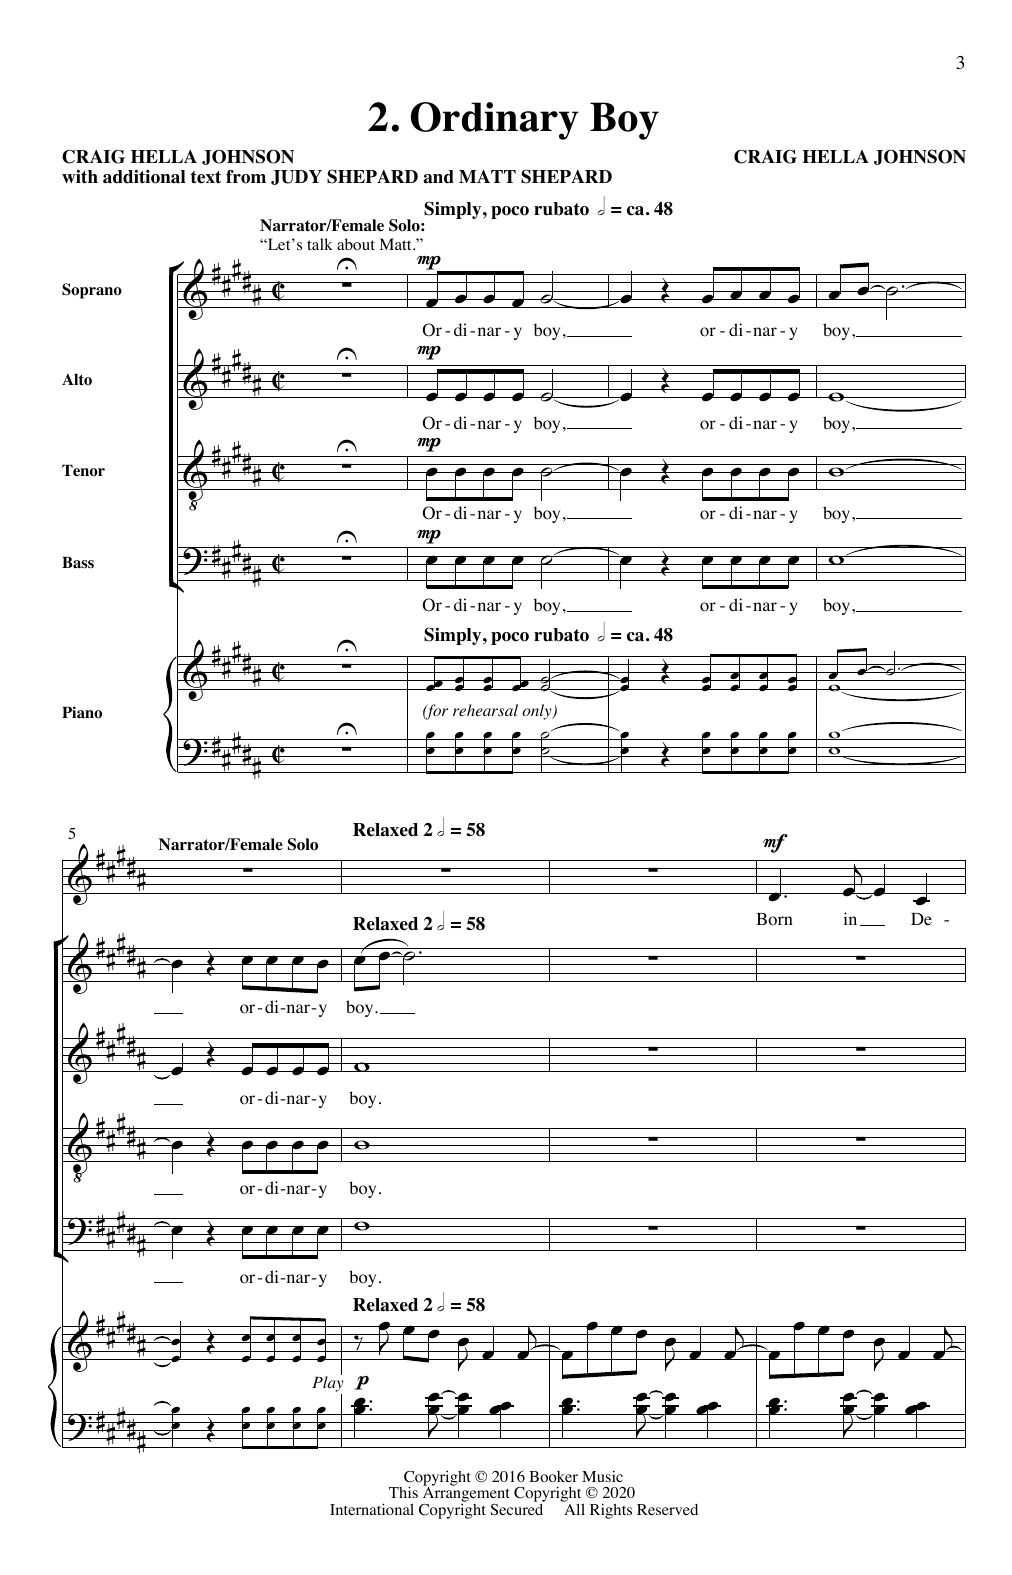 Download Craig Hella Johnson Considering Matthew Shepard: A Choral Suite sheet music and printable PDF score & Festival music notes